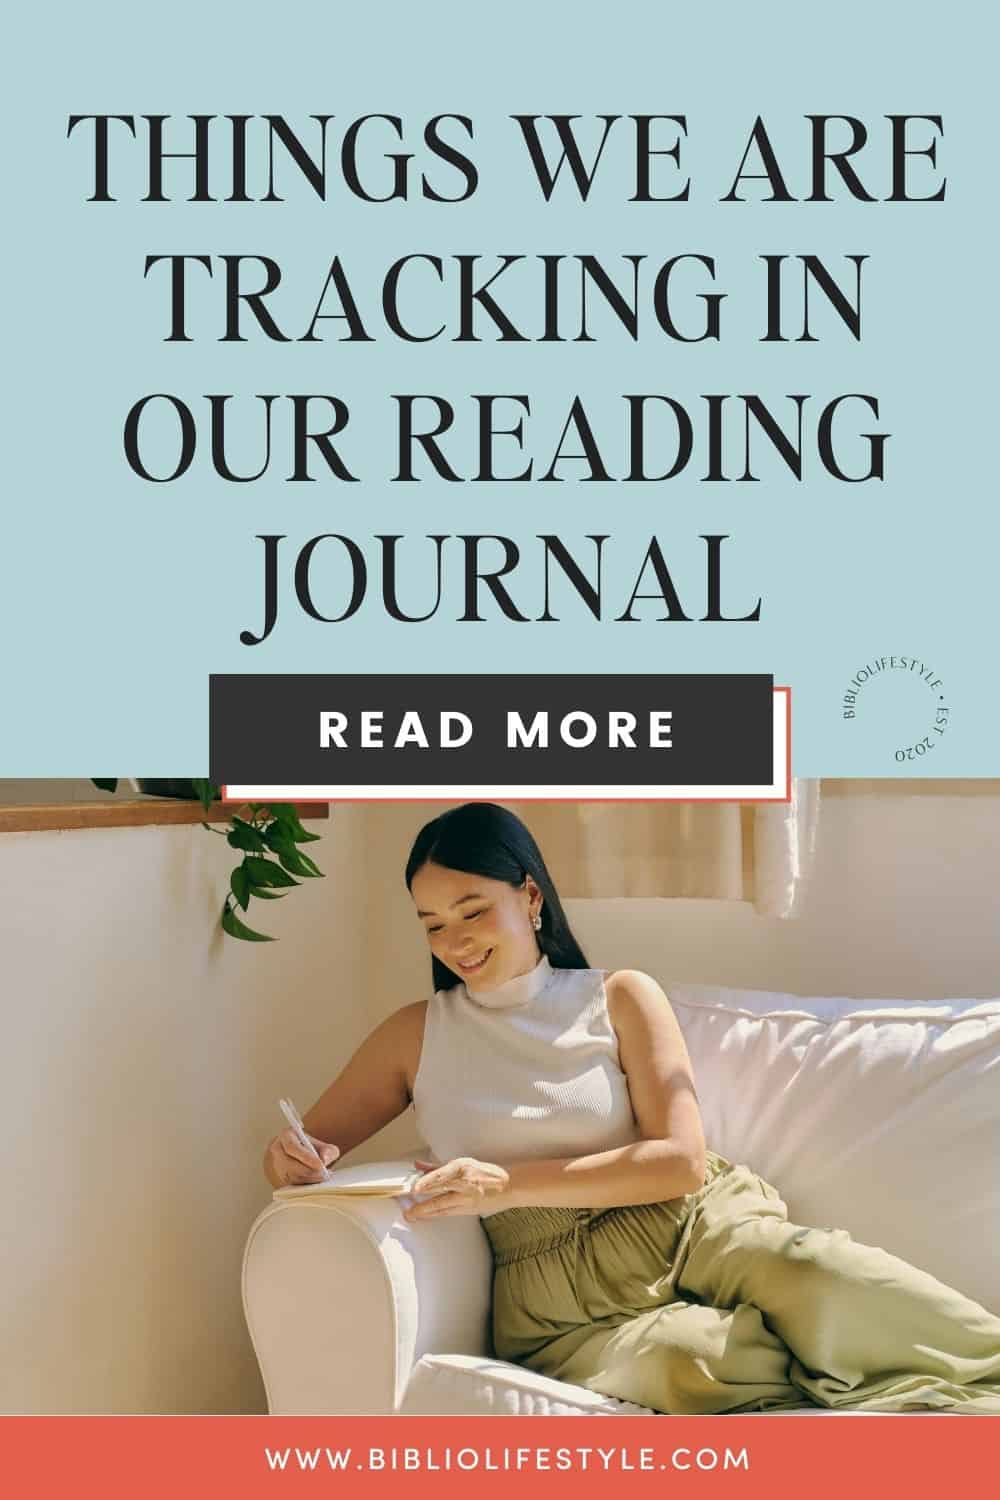 A List of Things We Are Tracking In Our Reading Journal